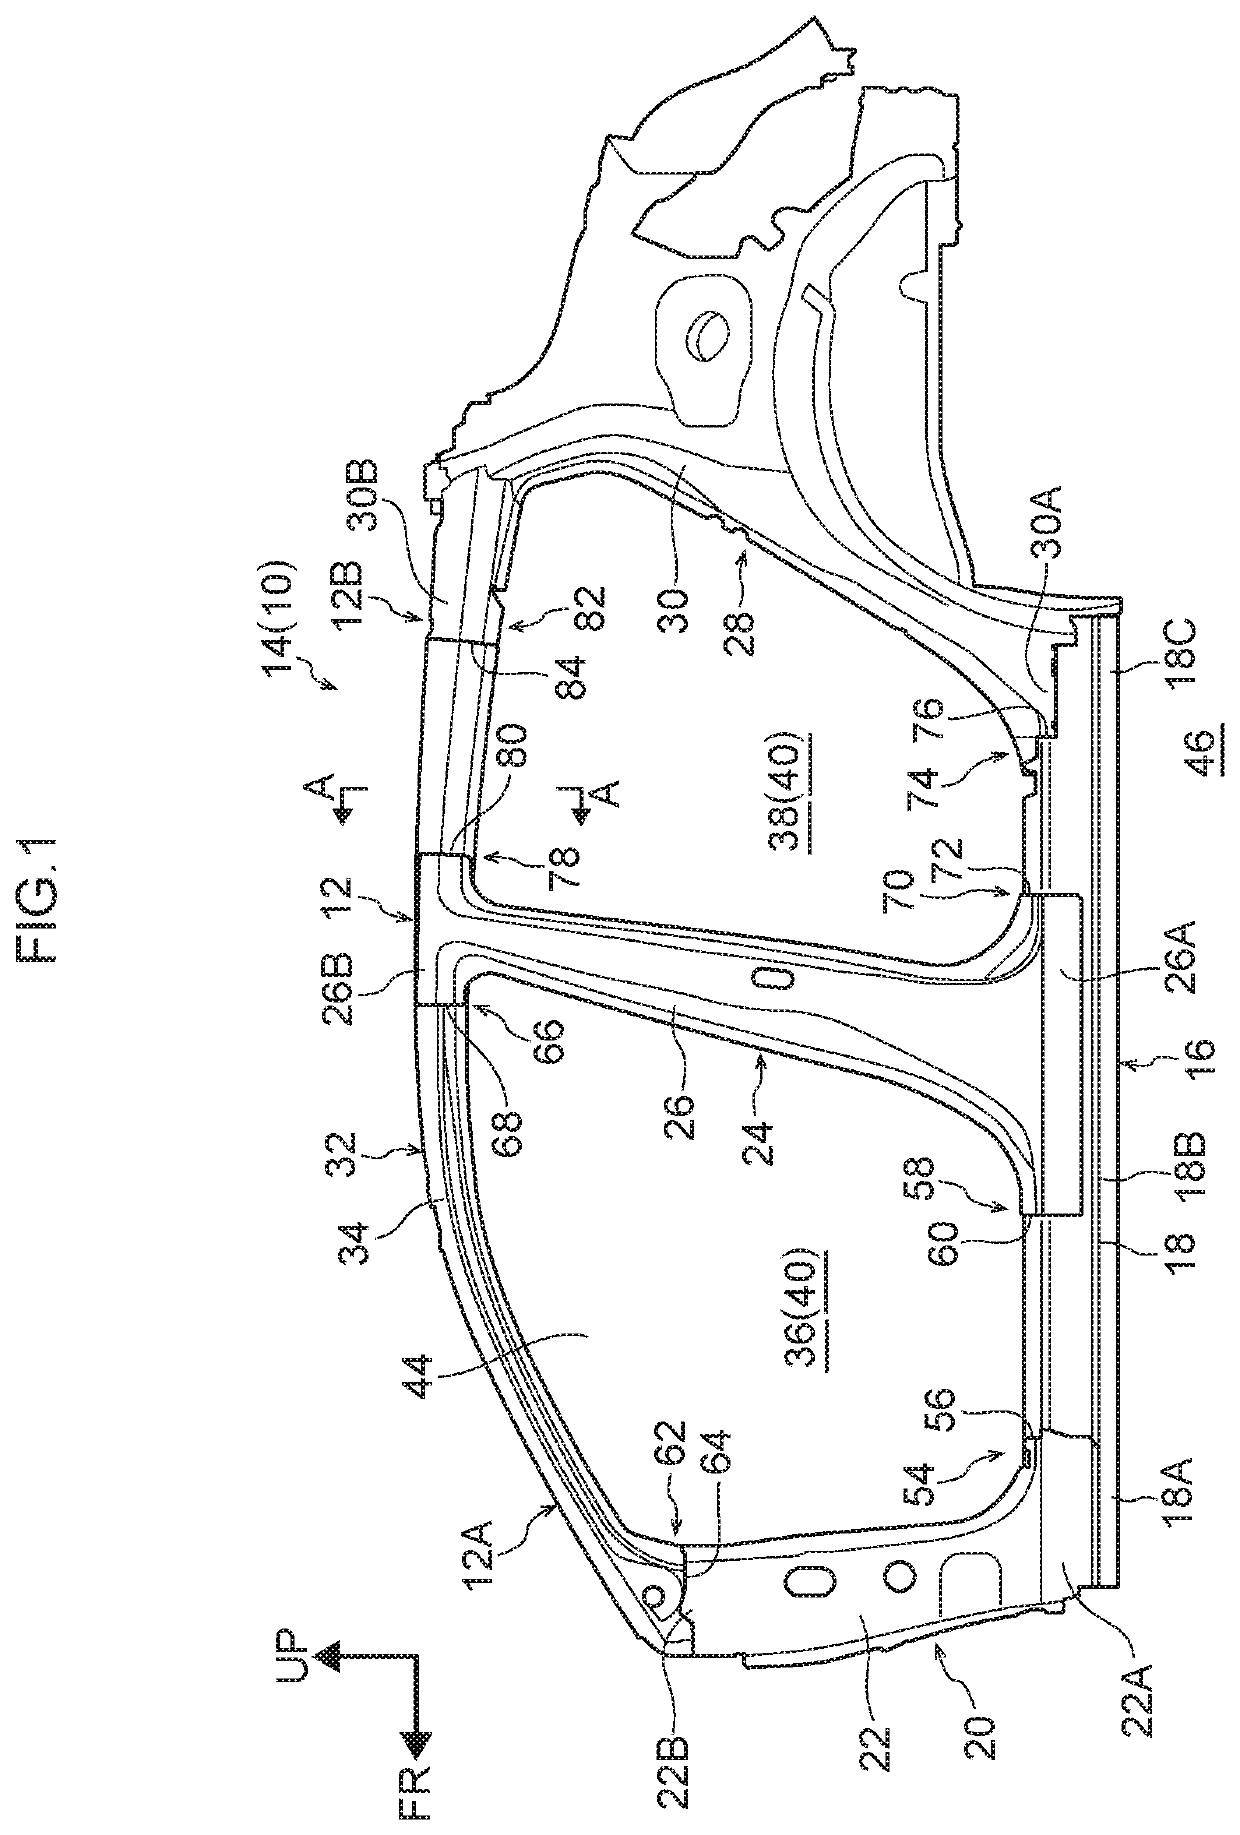 Vehicle body member manufacturing method and vehicle body member joint portion seal structure